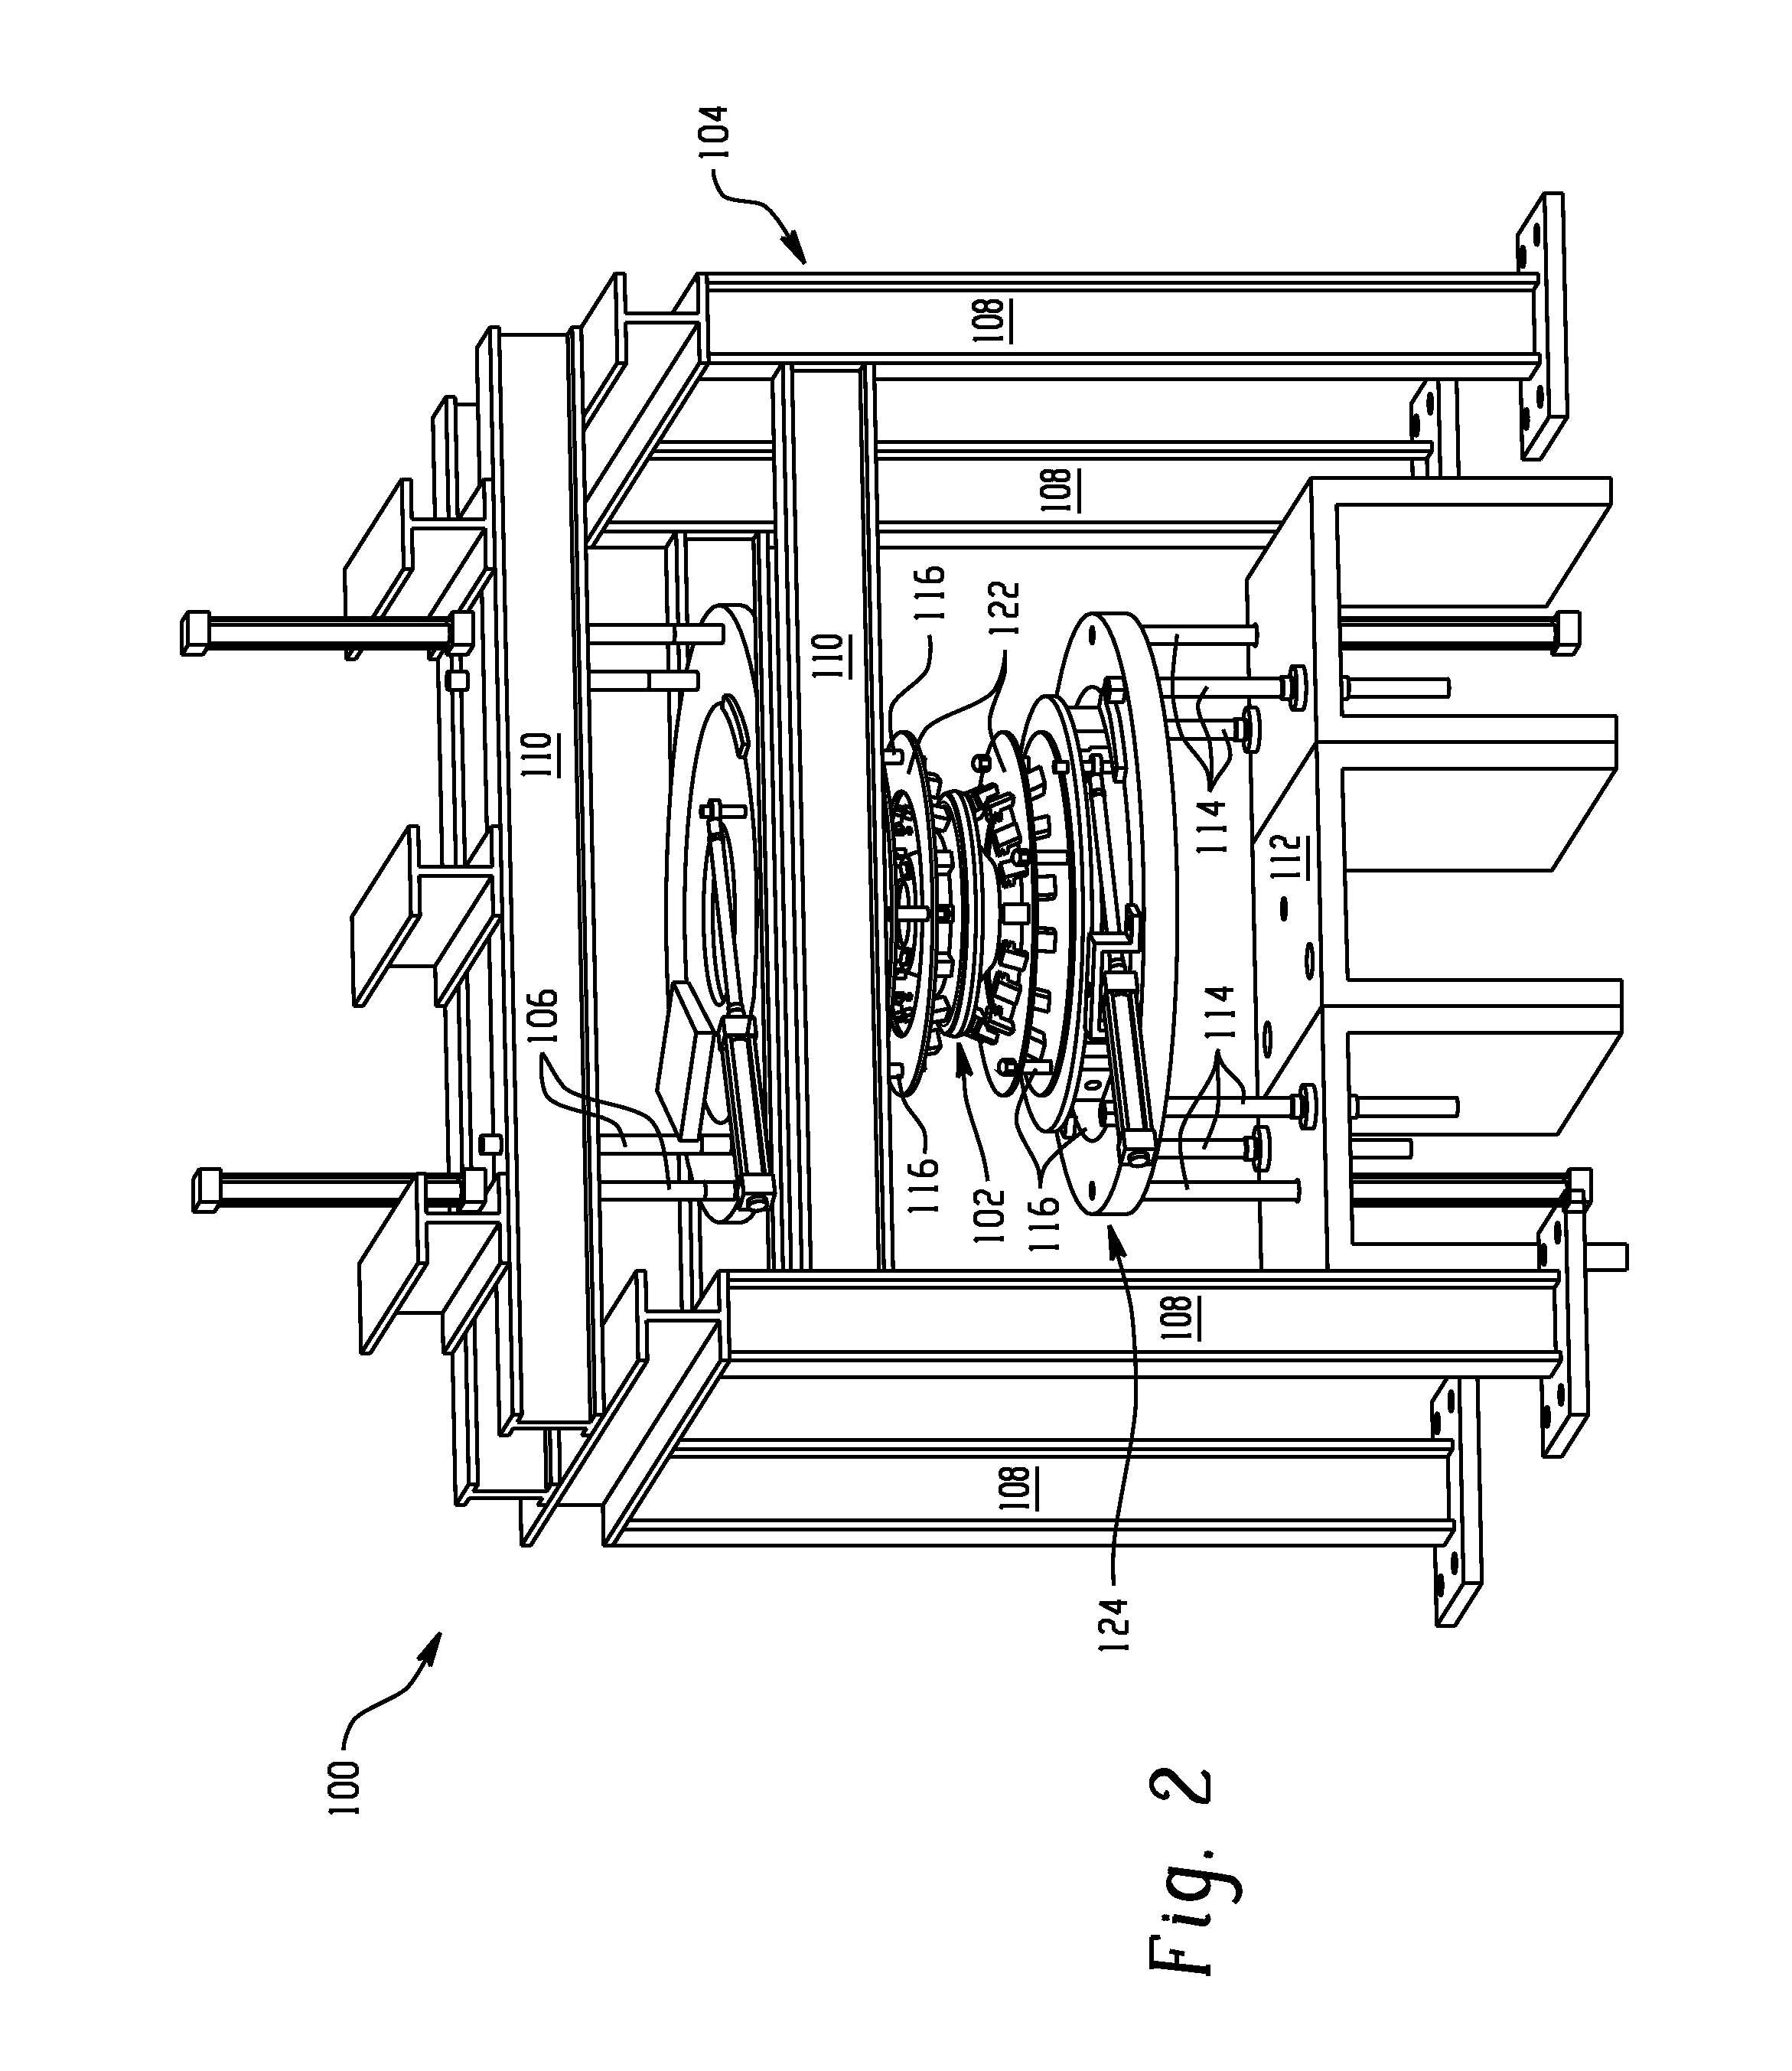 Cooling systems for heat-treated parts and methods of use